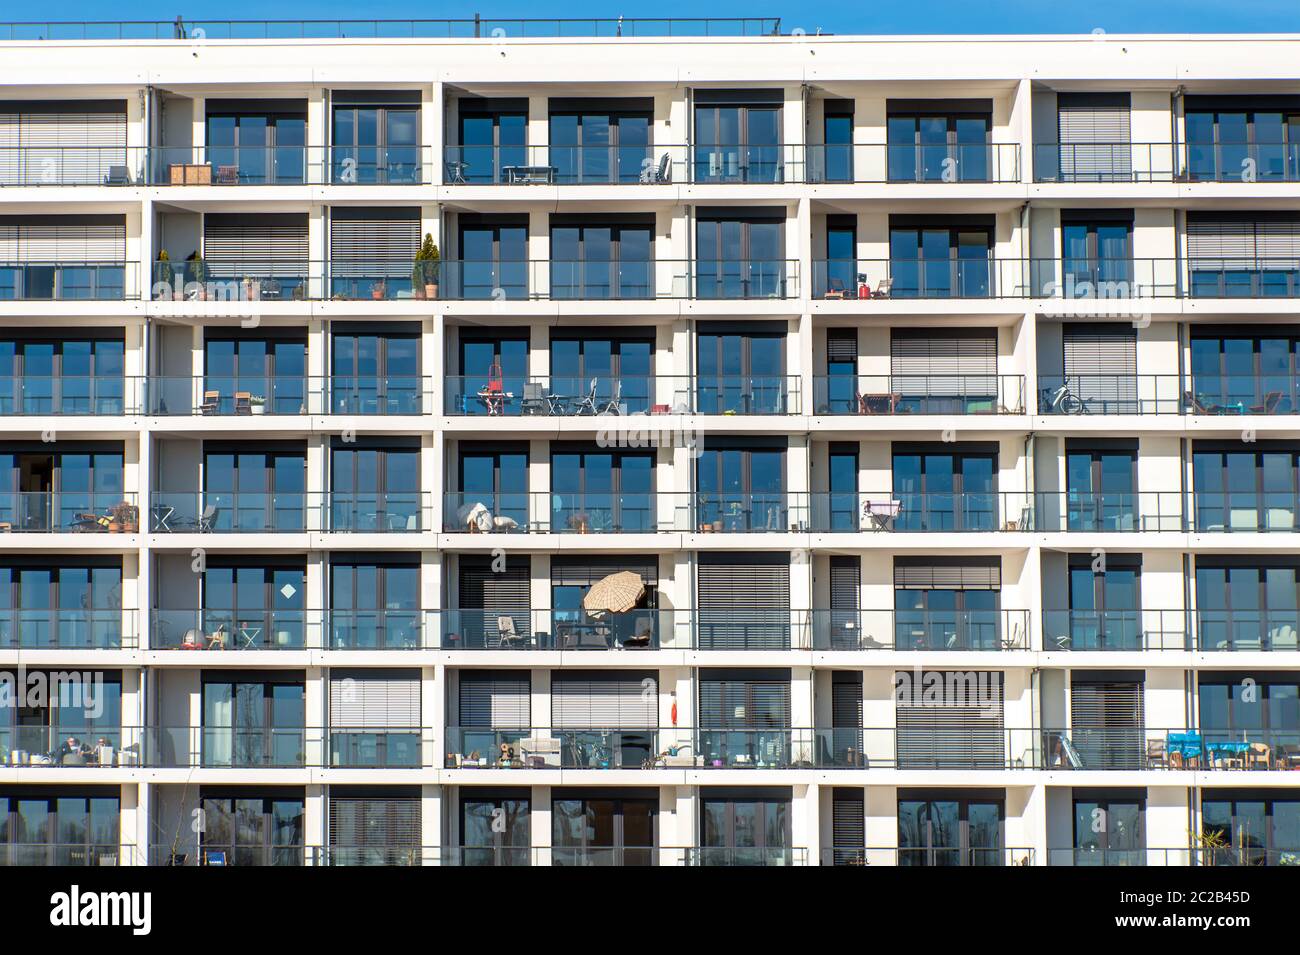 Facade of a modern apartment building with a lot of balconies seen in Hamburg, Germany Stock Photo